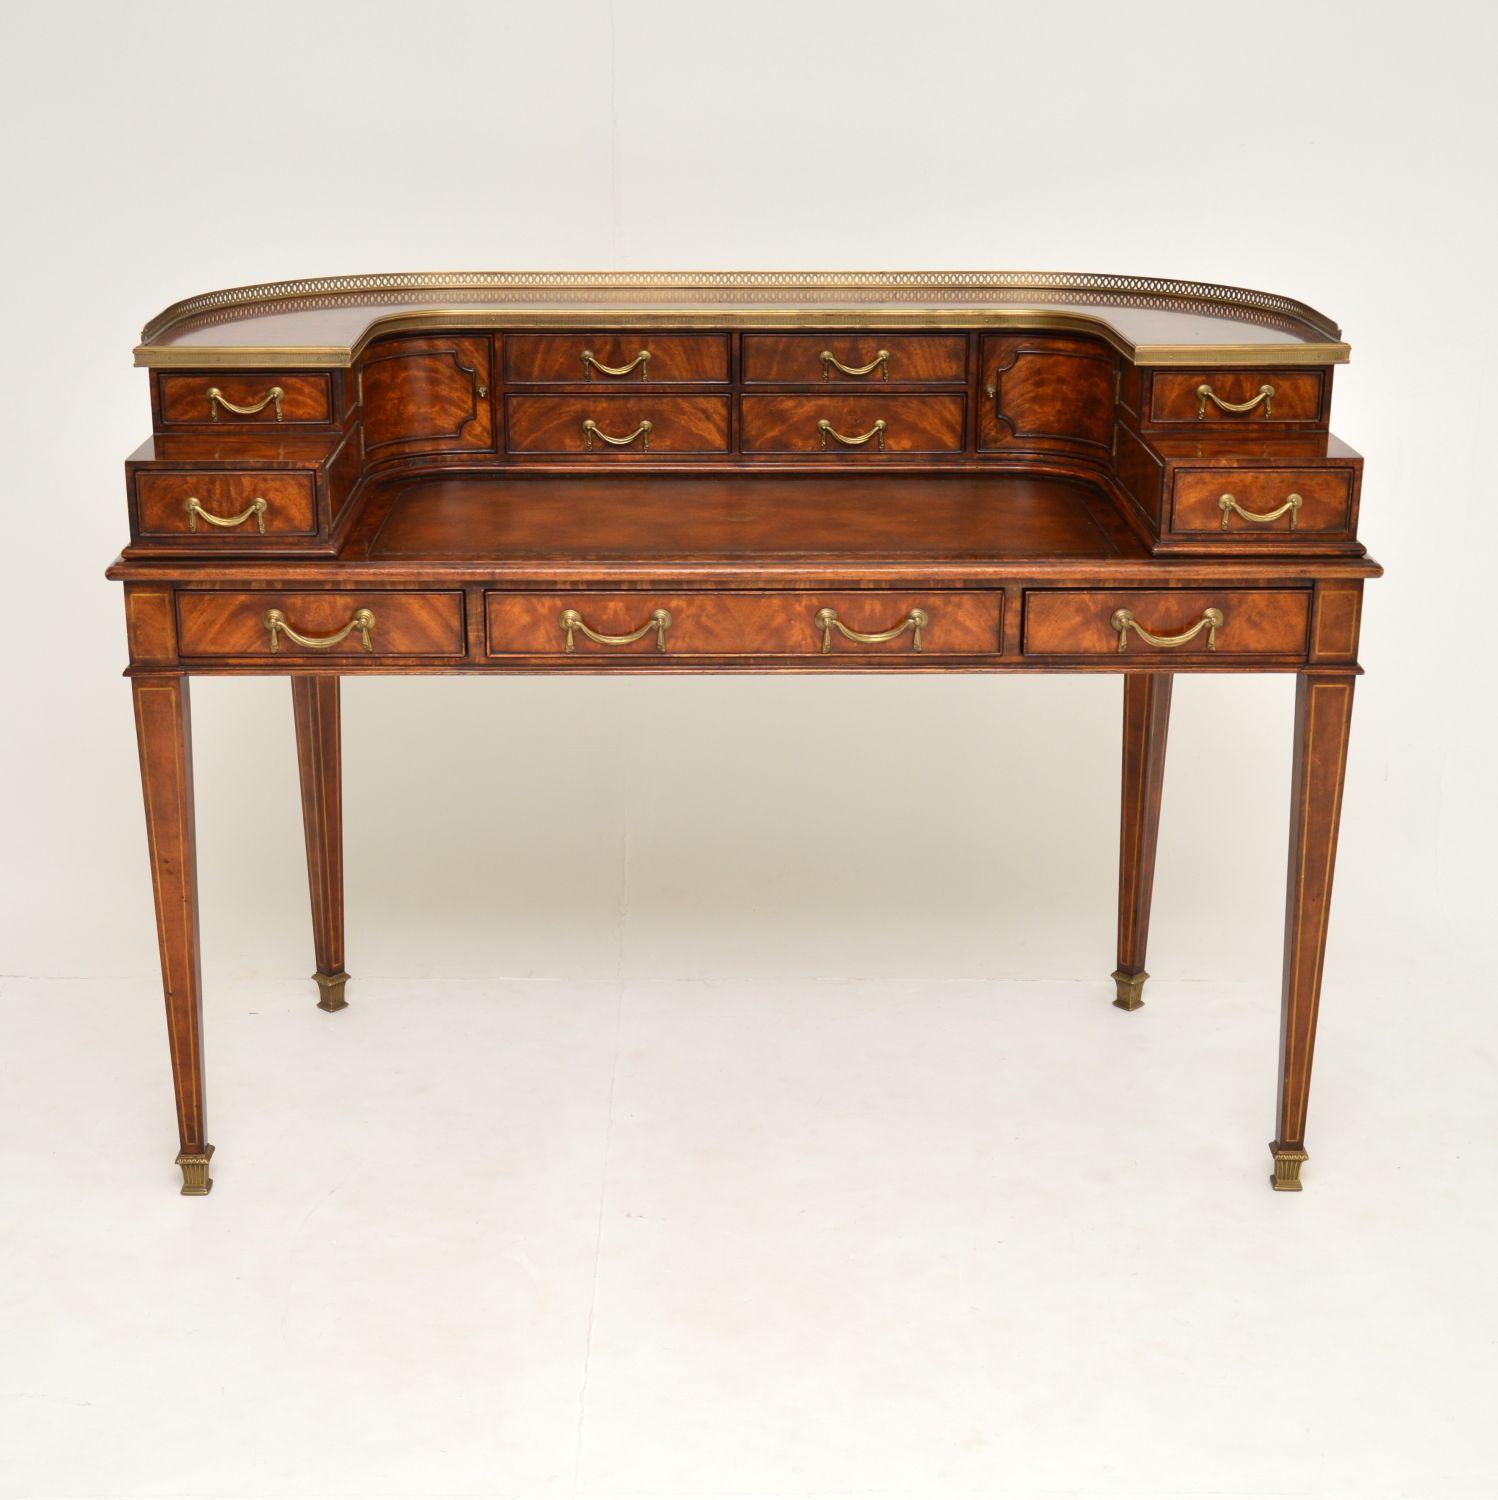 A magnificent Carlton house desk, beautifully made from mahogany, leather and brass. This dates from the late 20th century, it was part of a prestigious Althorp collection by Theodore Alexander.

It was inspired by the furniture from Althorp, the